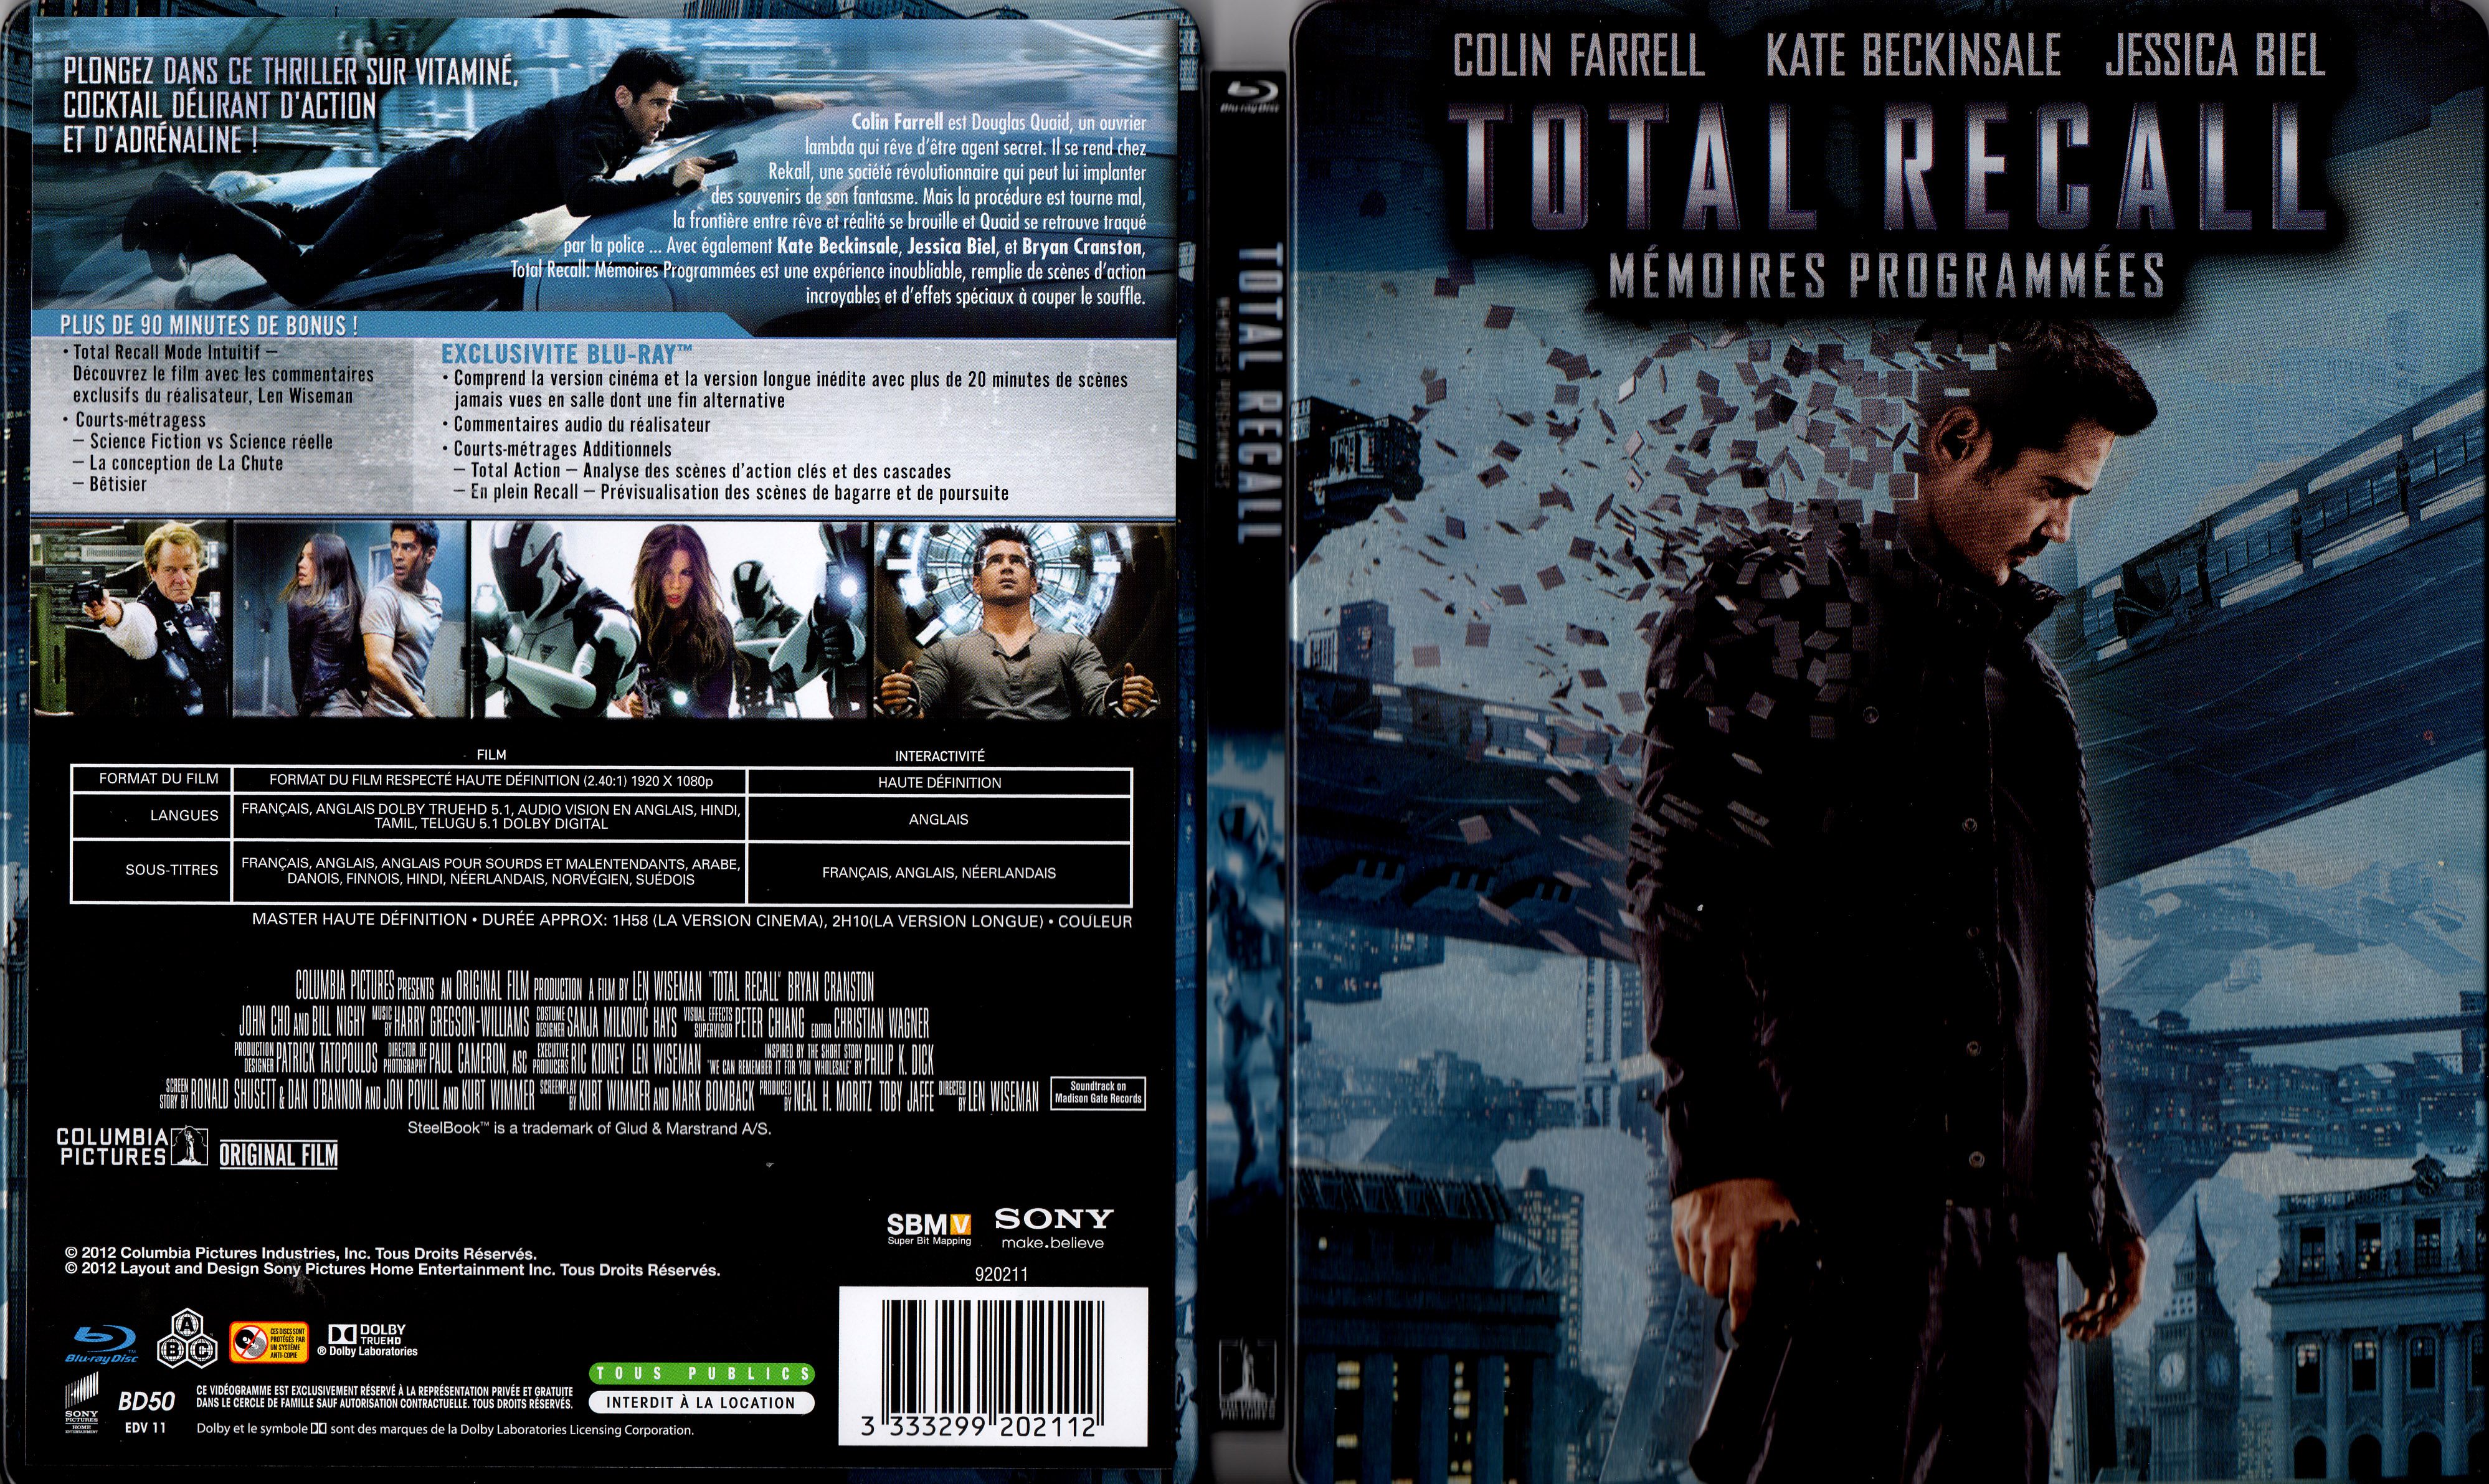 Jaquette DVD Total recall mmoires programmes (BLU-RAY) v3